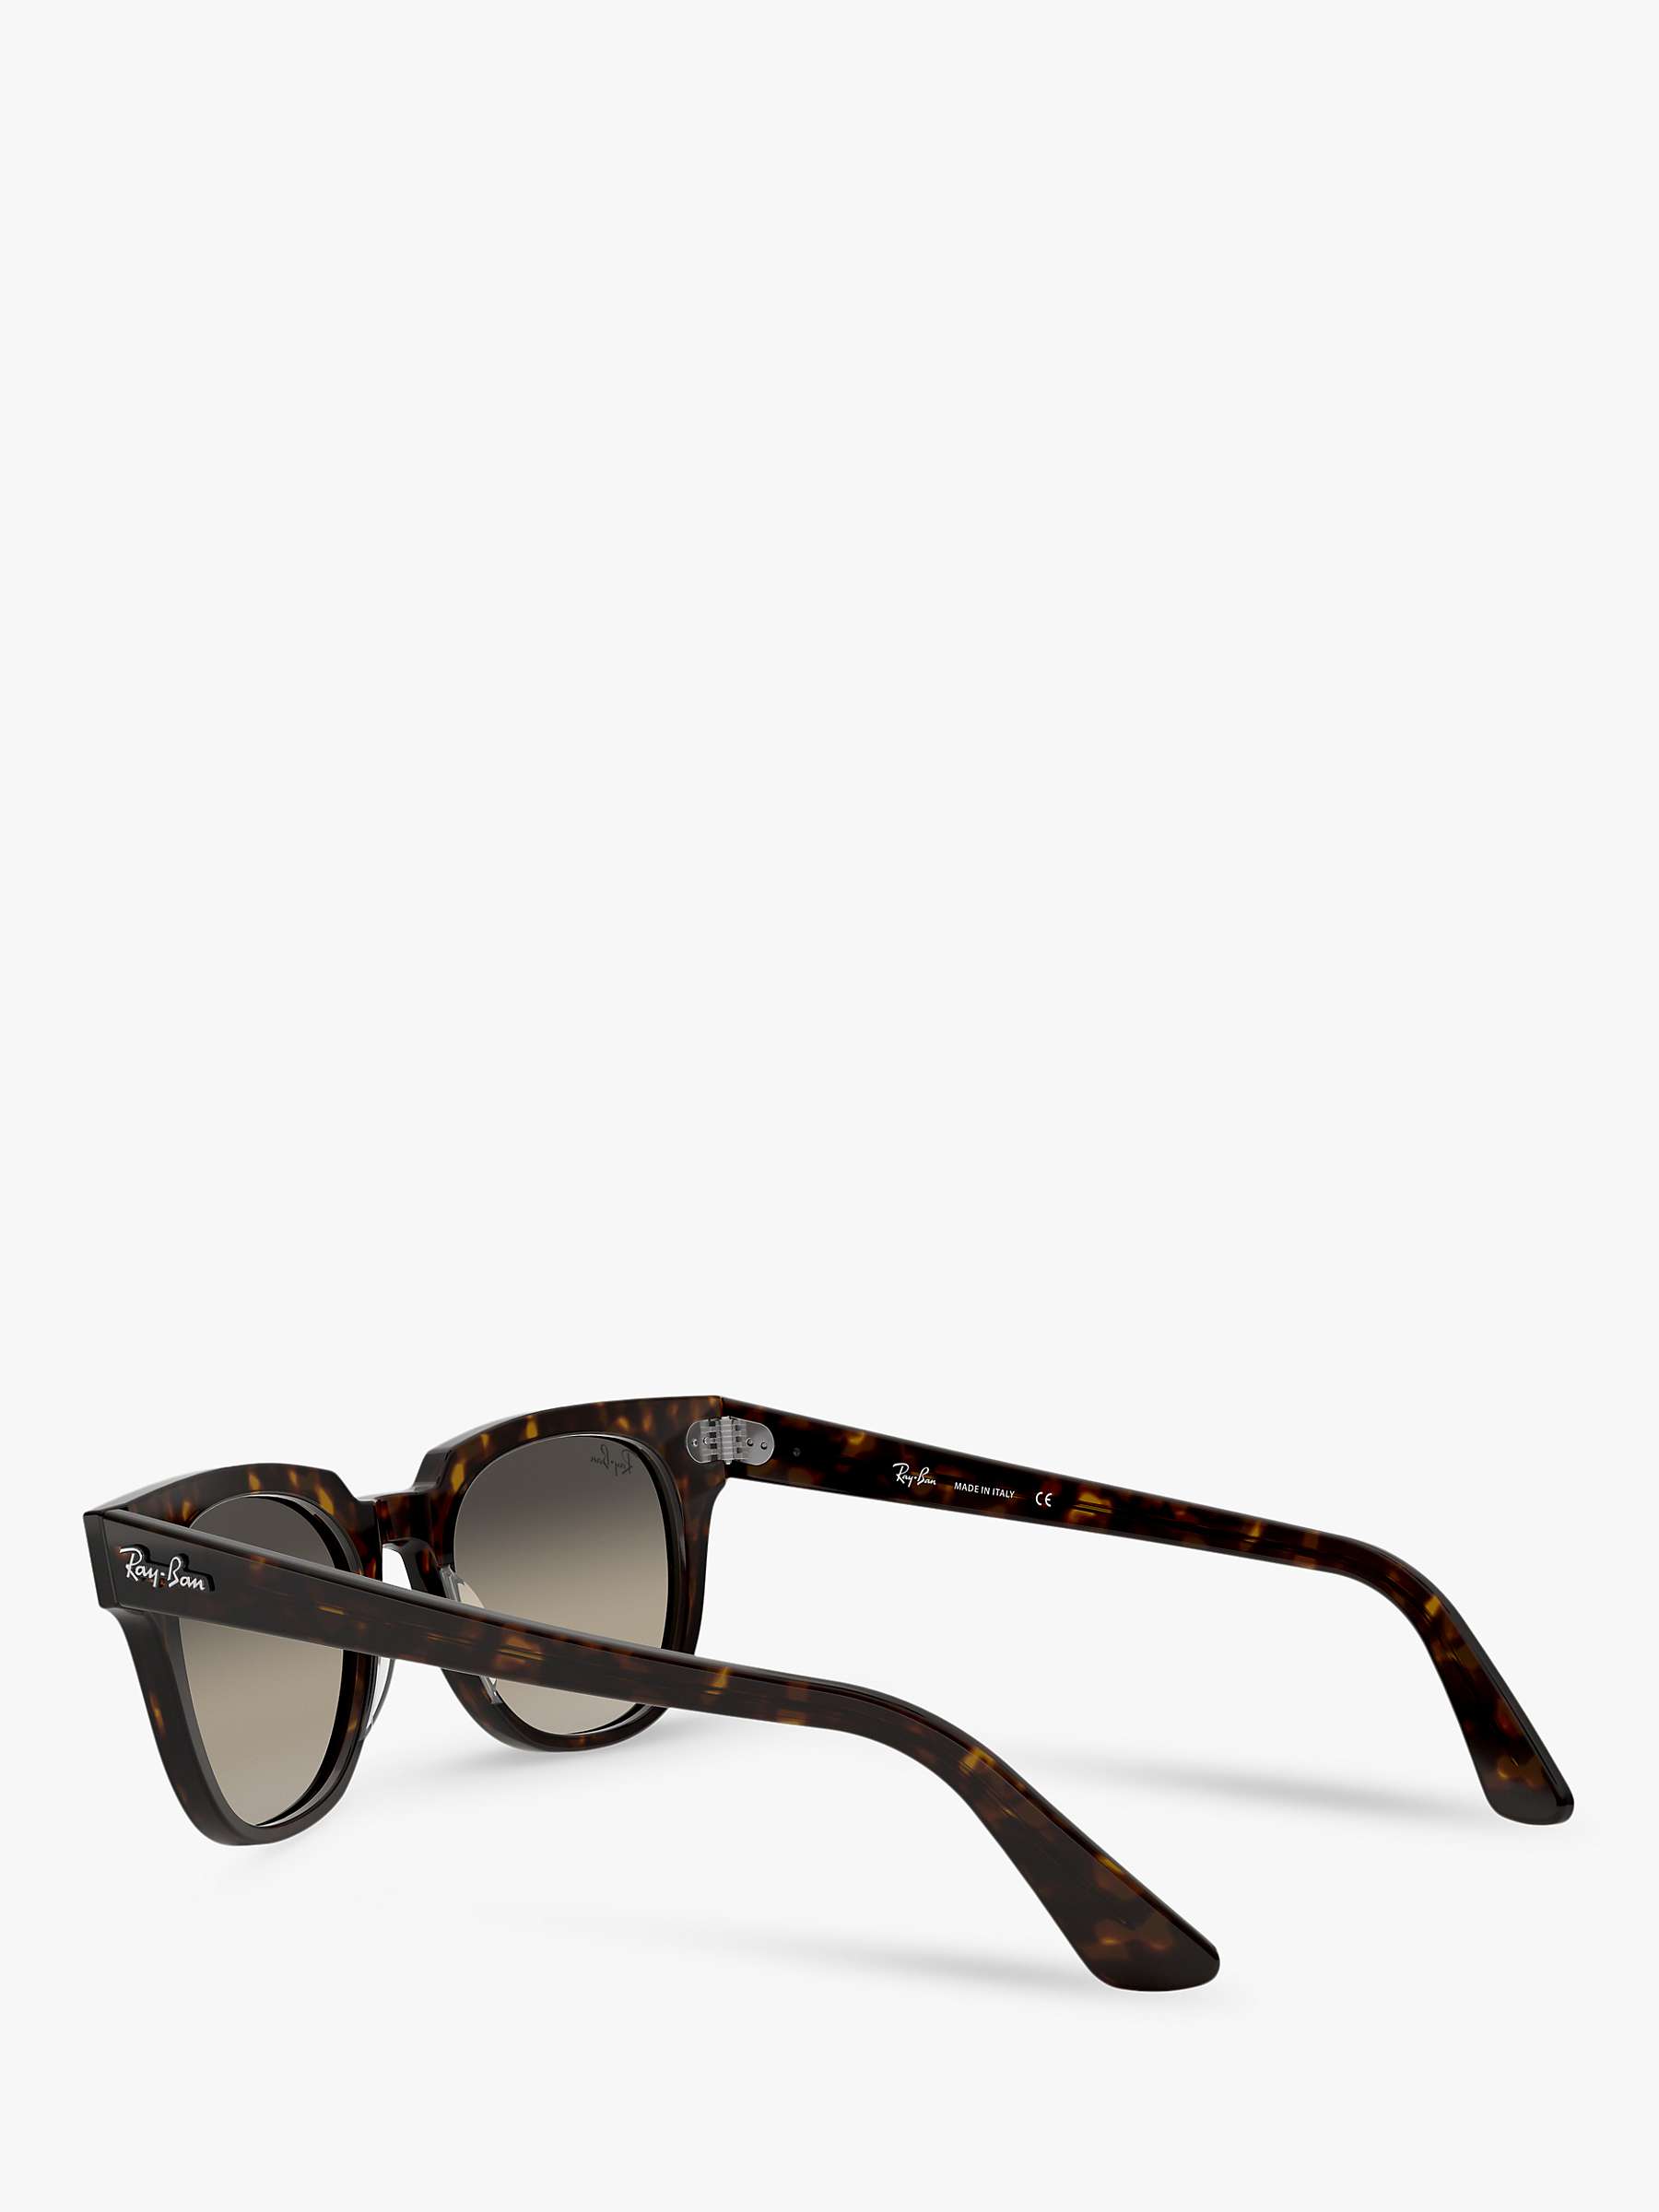 Buy Ray-Ban RB2168 Unisex Square Sunglasses Online at johnlewis.com